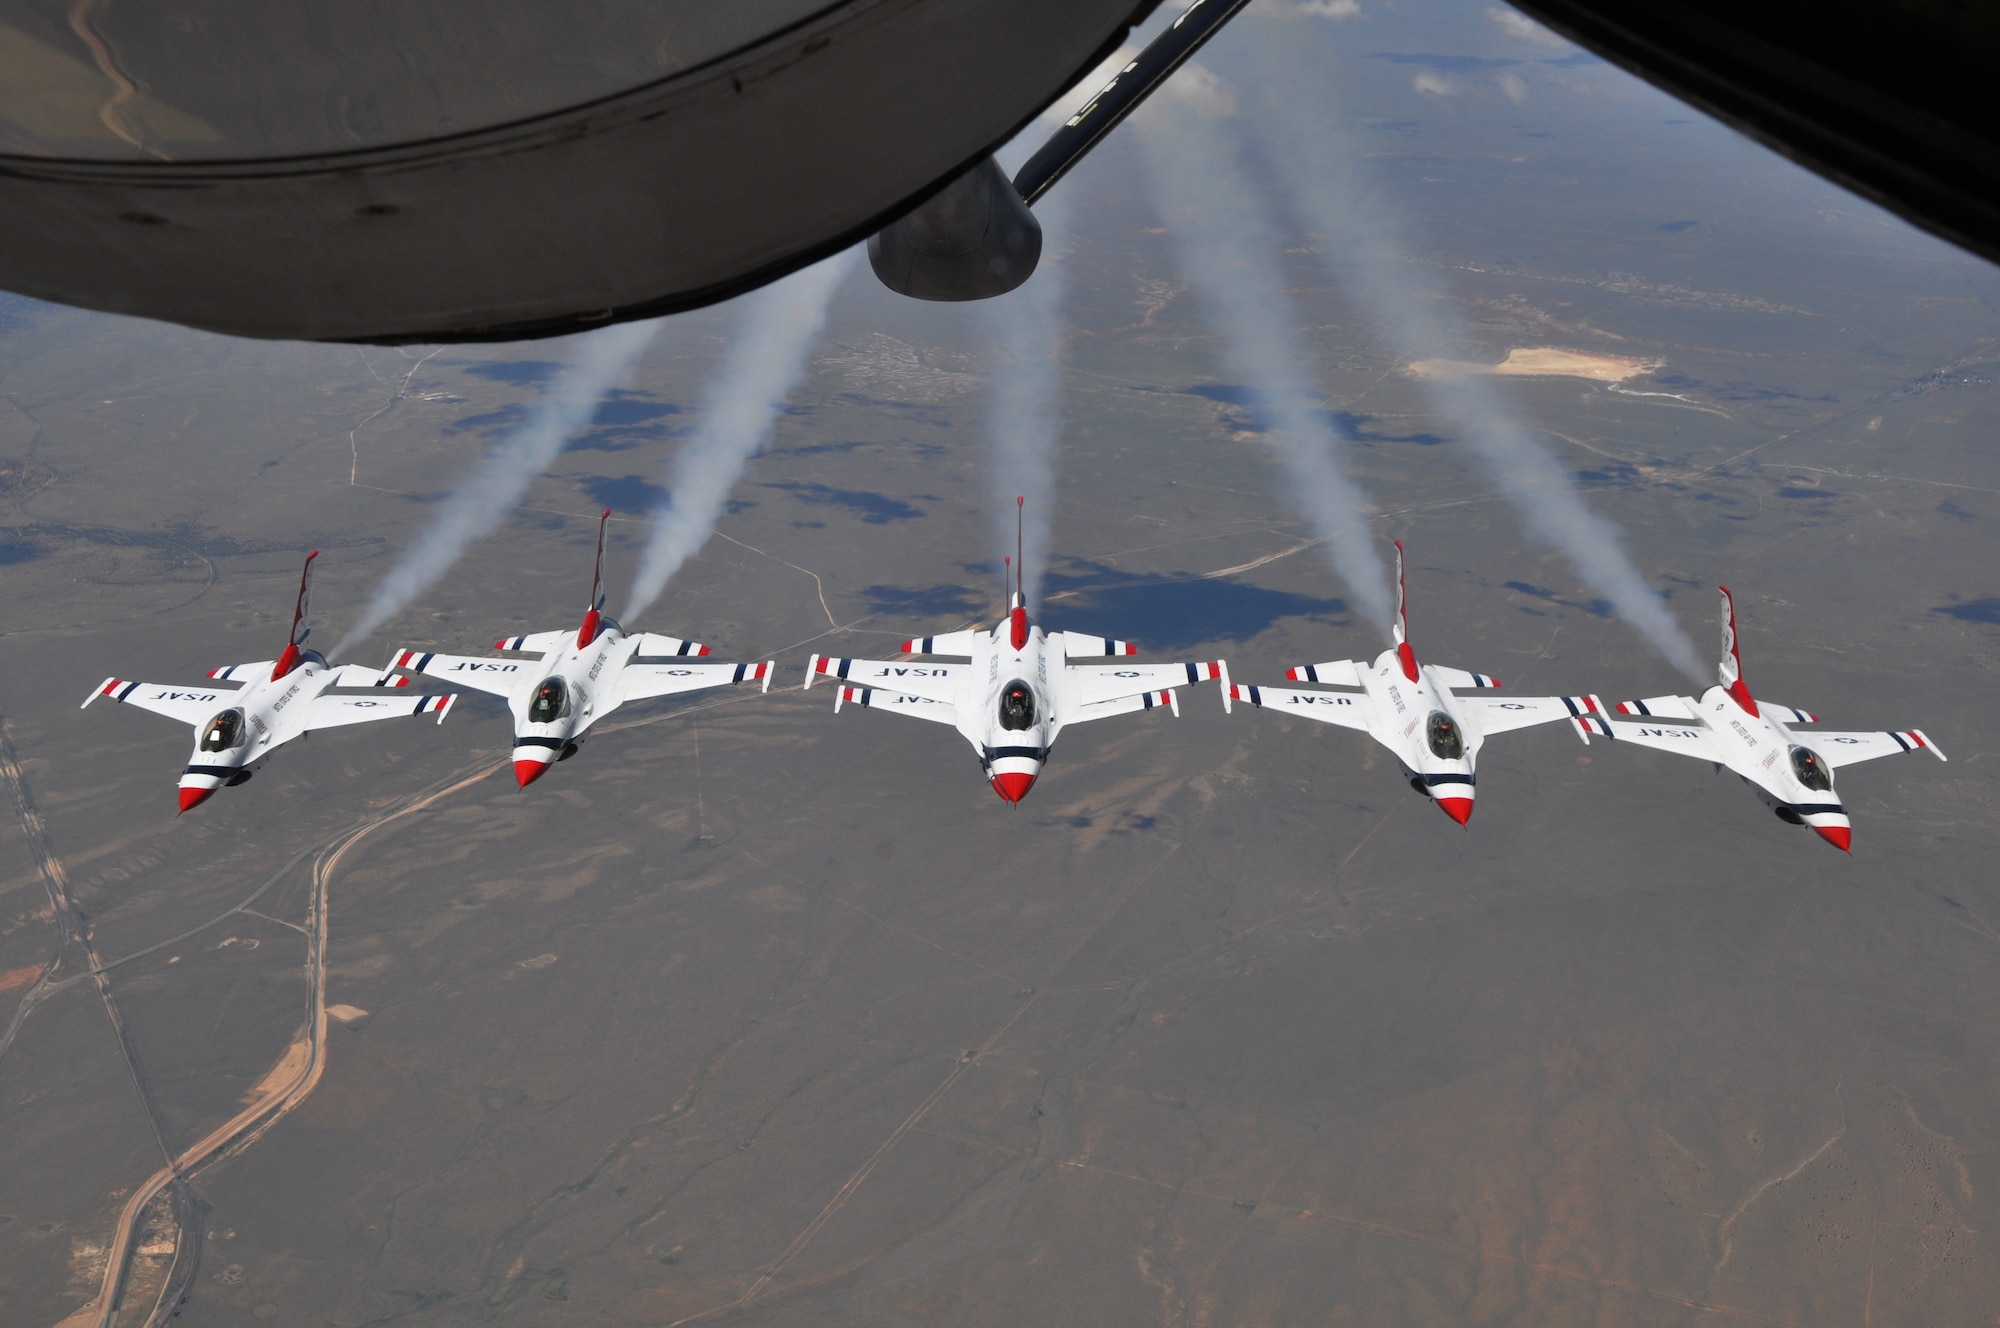 The U.S. Air Force Thunderbirds Air Demonstration Squadron, fly their F-16 Fighting Falcons into formation near the refueling boom of a KC-135 Stratotanker from McConnell Air Force Base, Kan., June 4, 2015. The KC-135 provided cross-country air refueling support for the Thunderbirds. The KC-135 aircrew, all Air Force Reservists from the 931st Air Refueling Group, performed fourteen air refueling contacts during the mission.  The squadron was on their way to the Heart of Texas Airshow in Waco, Texas, June 6-7. The squadron performs approximately 75 demonstrations each year and has never canceled a demonstration due to maintenance difficulty. More than 300 million people in all 50 states and 58 foreign countries have seen the red, white and blue jets in more than 4,000 aerial demonstrations.  (U.S. Air Force photo by Tech. Sgt. Abigail Klein)
